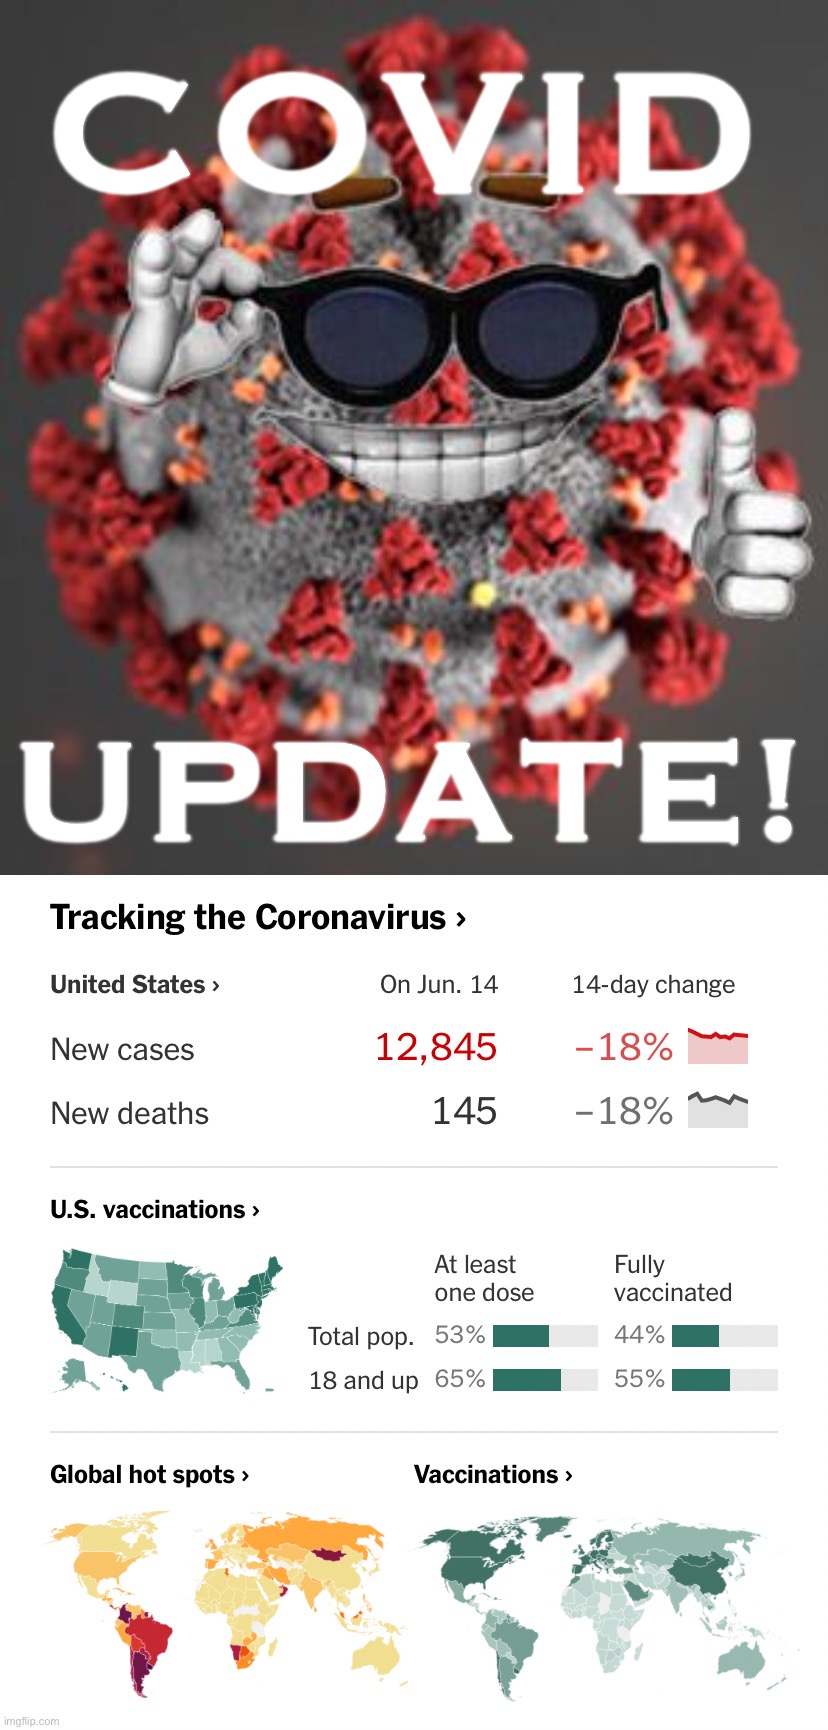 Deaths down to in the neighborhood of 150/day. (Only a little more than gun violence deaths per day!) | COVID; UPDATE! | image tagged in coronavirus,covid-19,corona virus,current events,america,pandemic | made w/ Imgflip meme maker